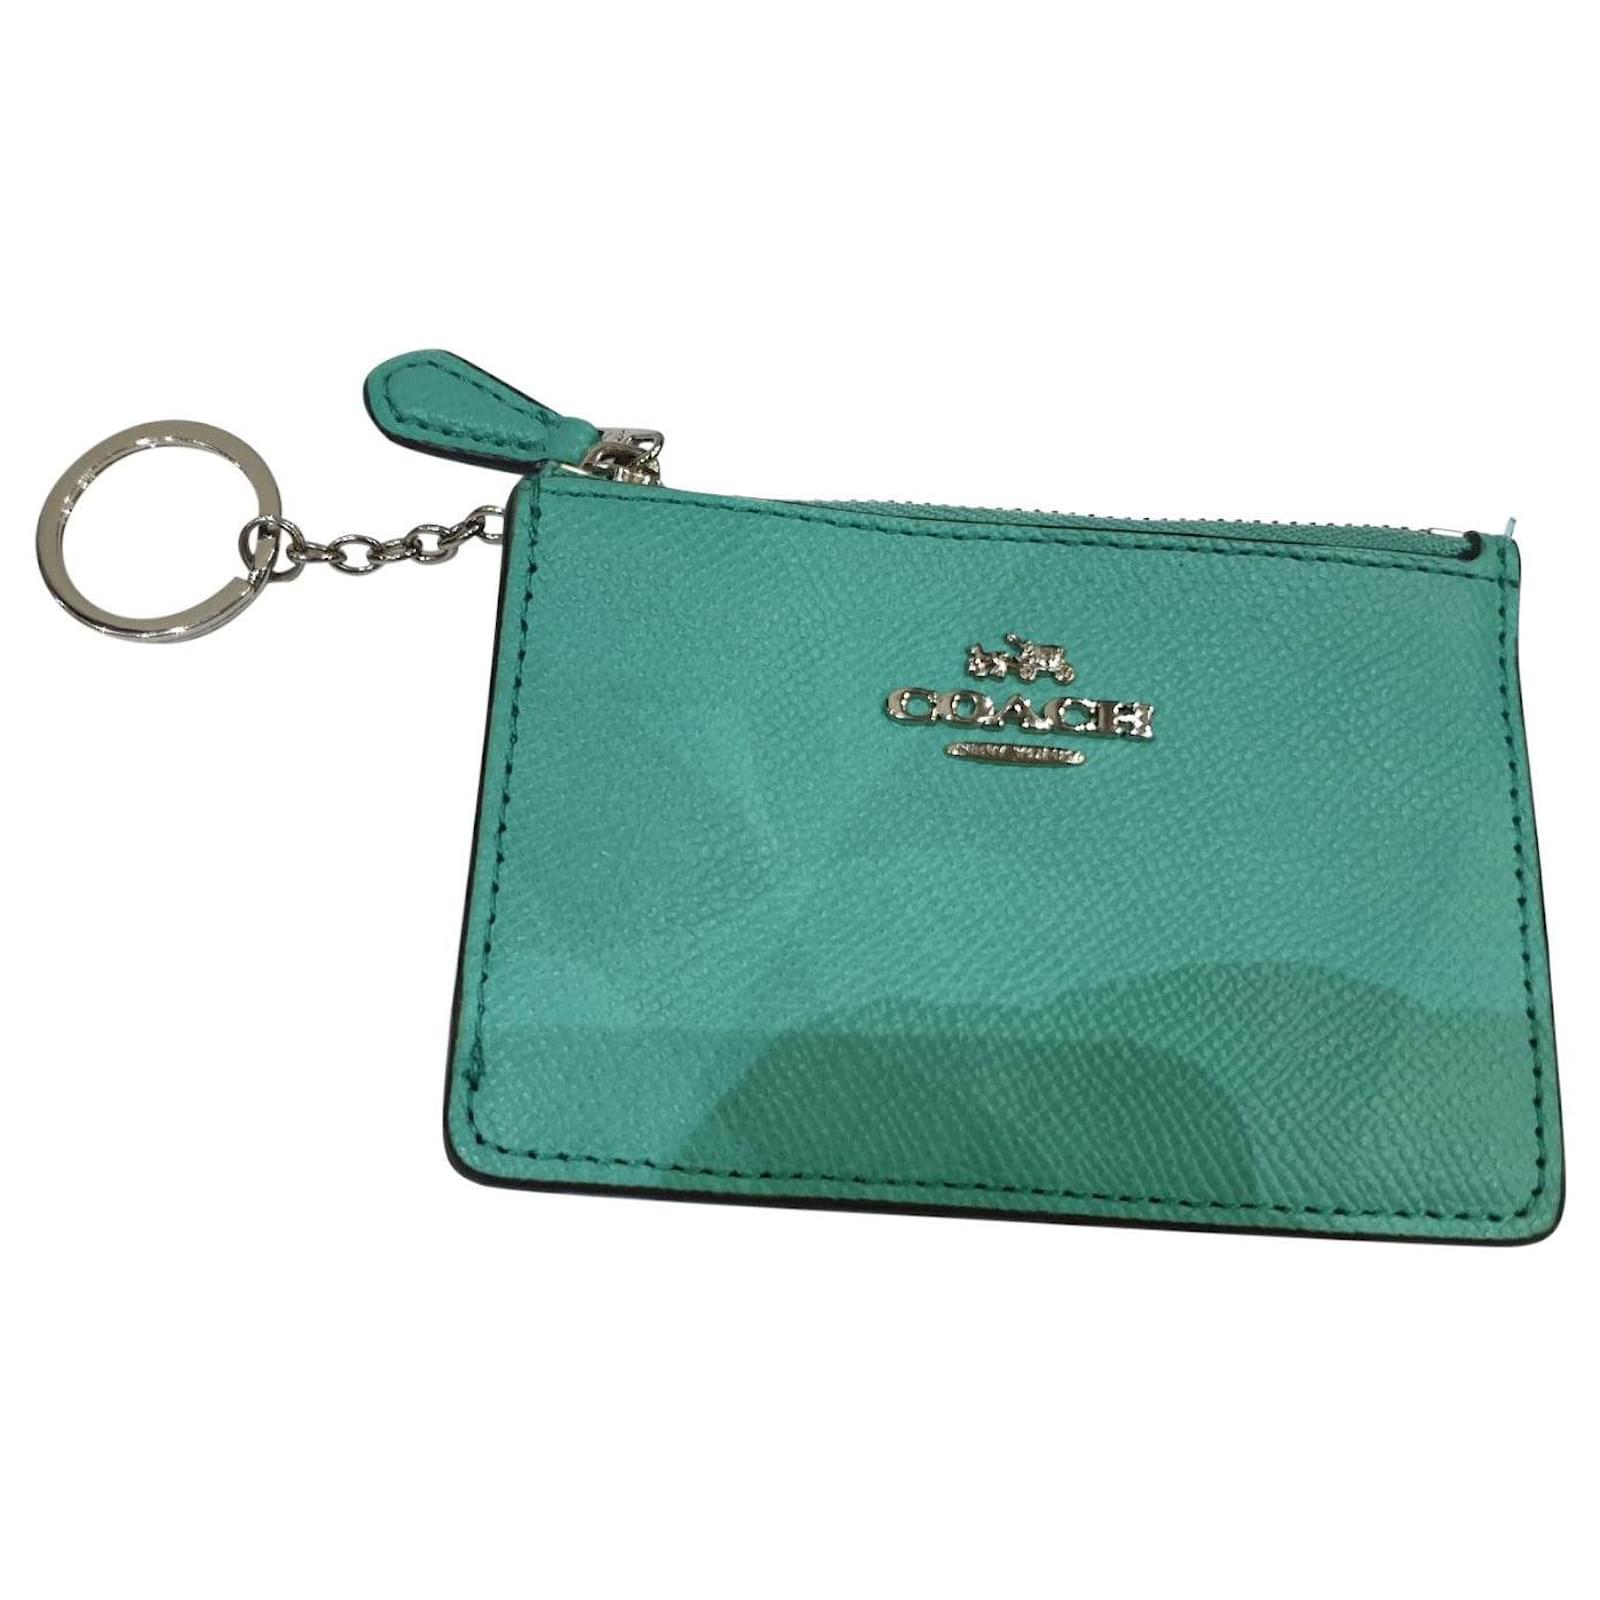 Pin on COACH Accessories: Keychains, Coin Cases